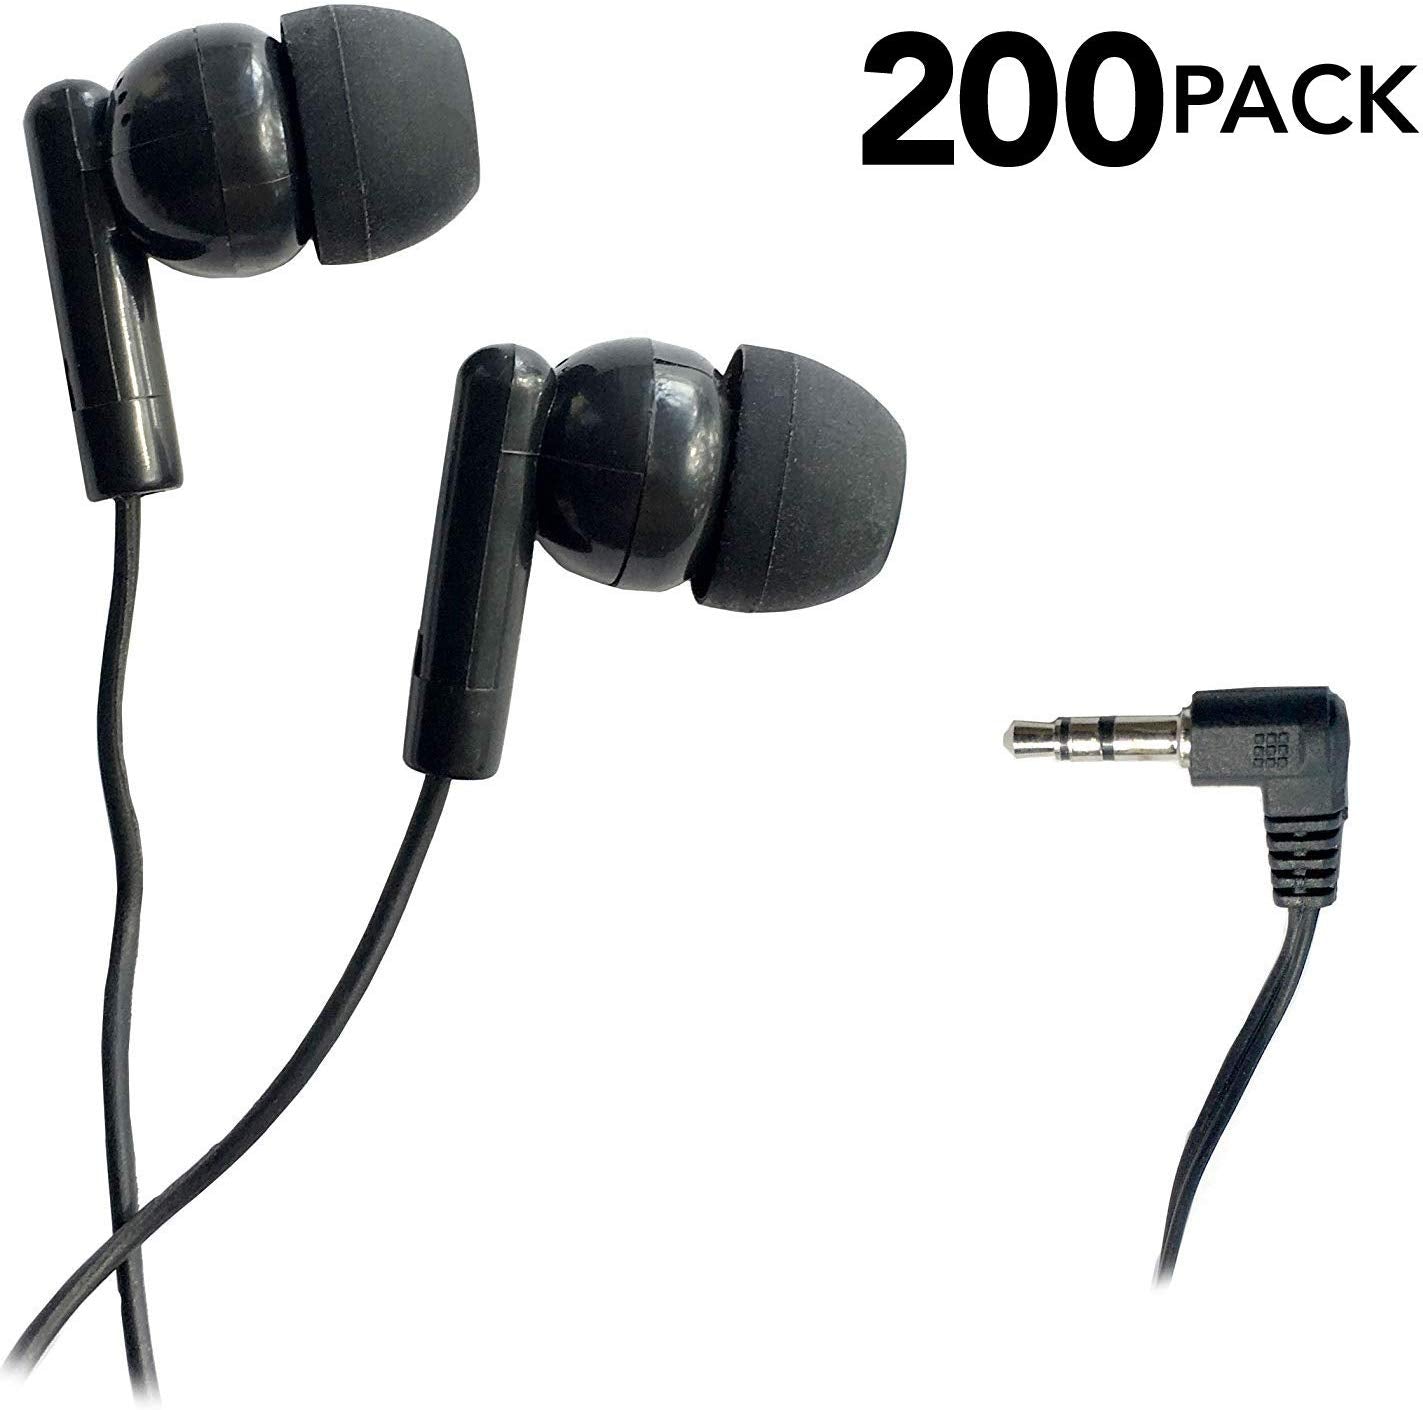 Bulk pack of 200 classroom testing earbuds by SmithOutlet